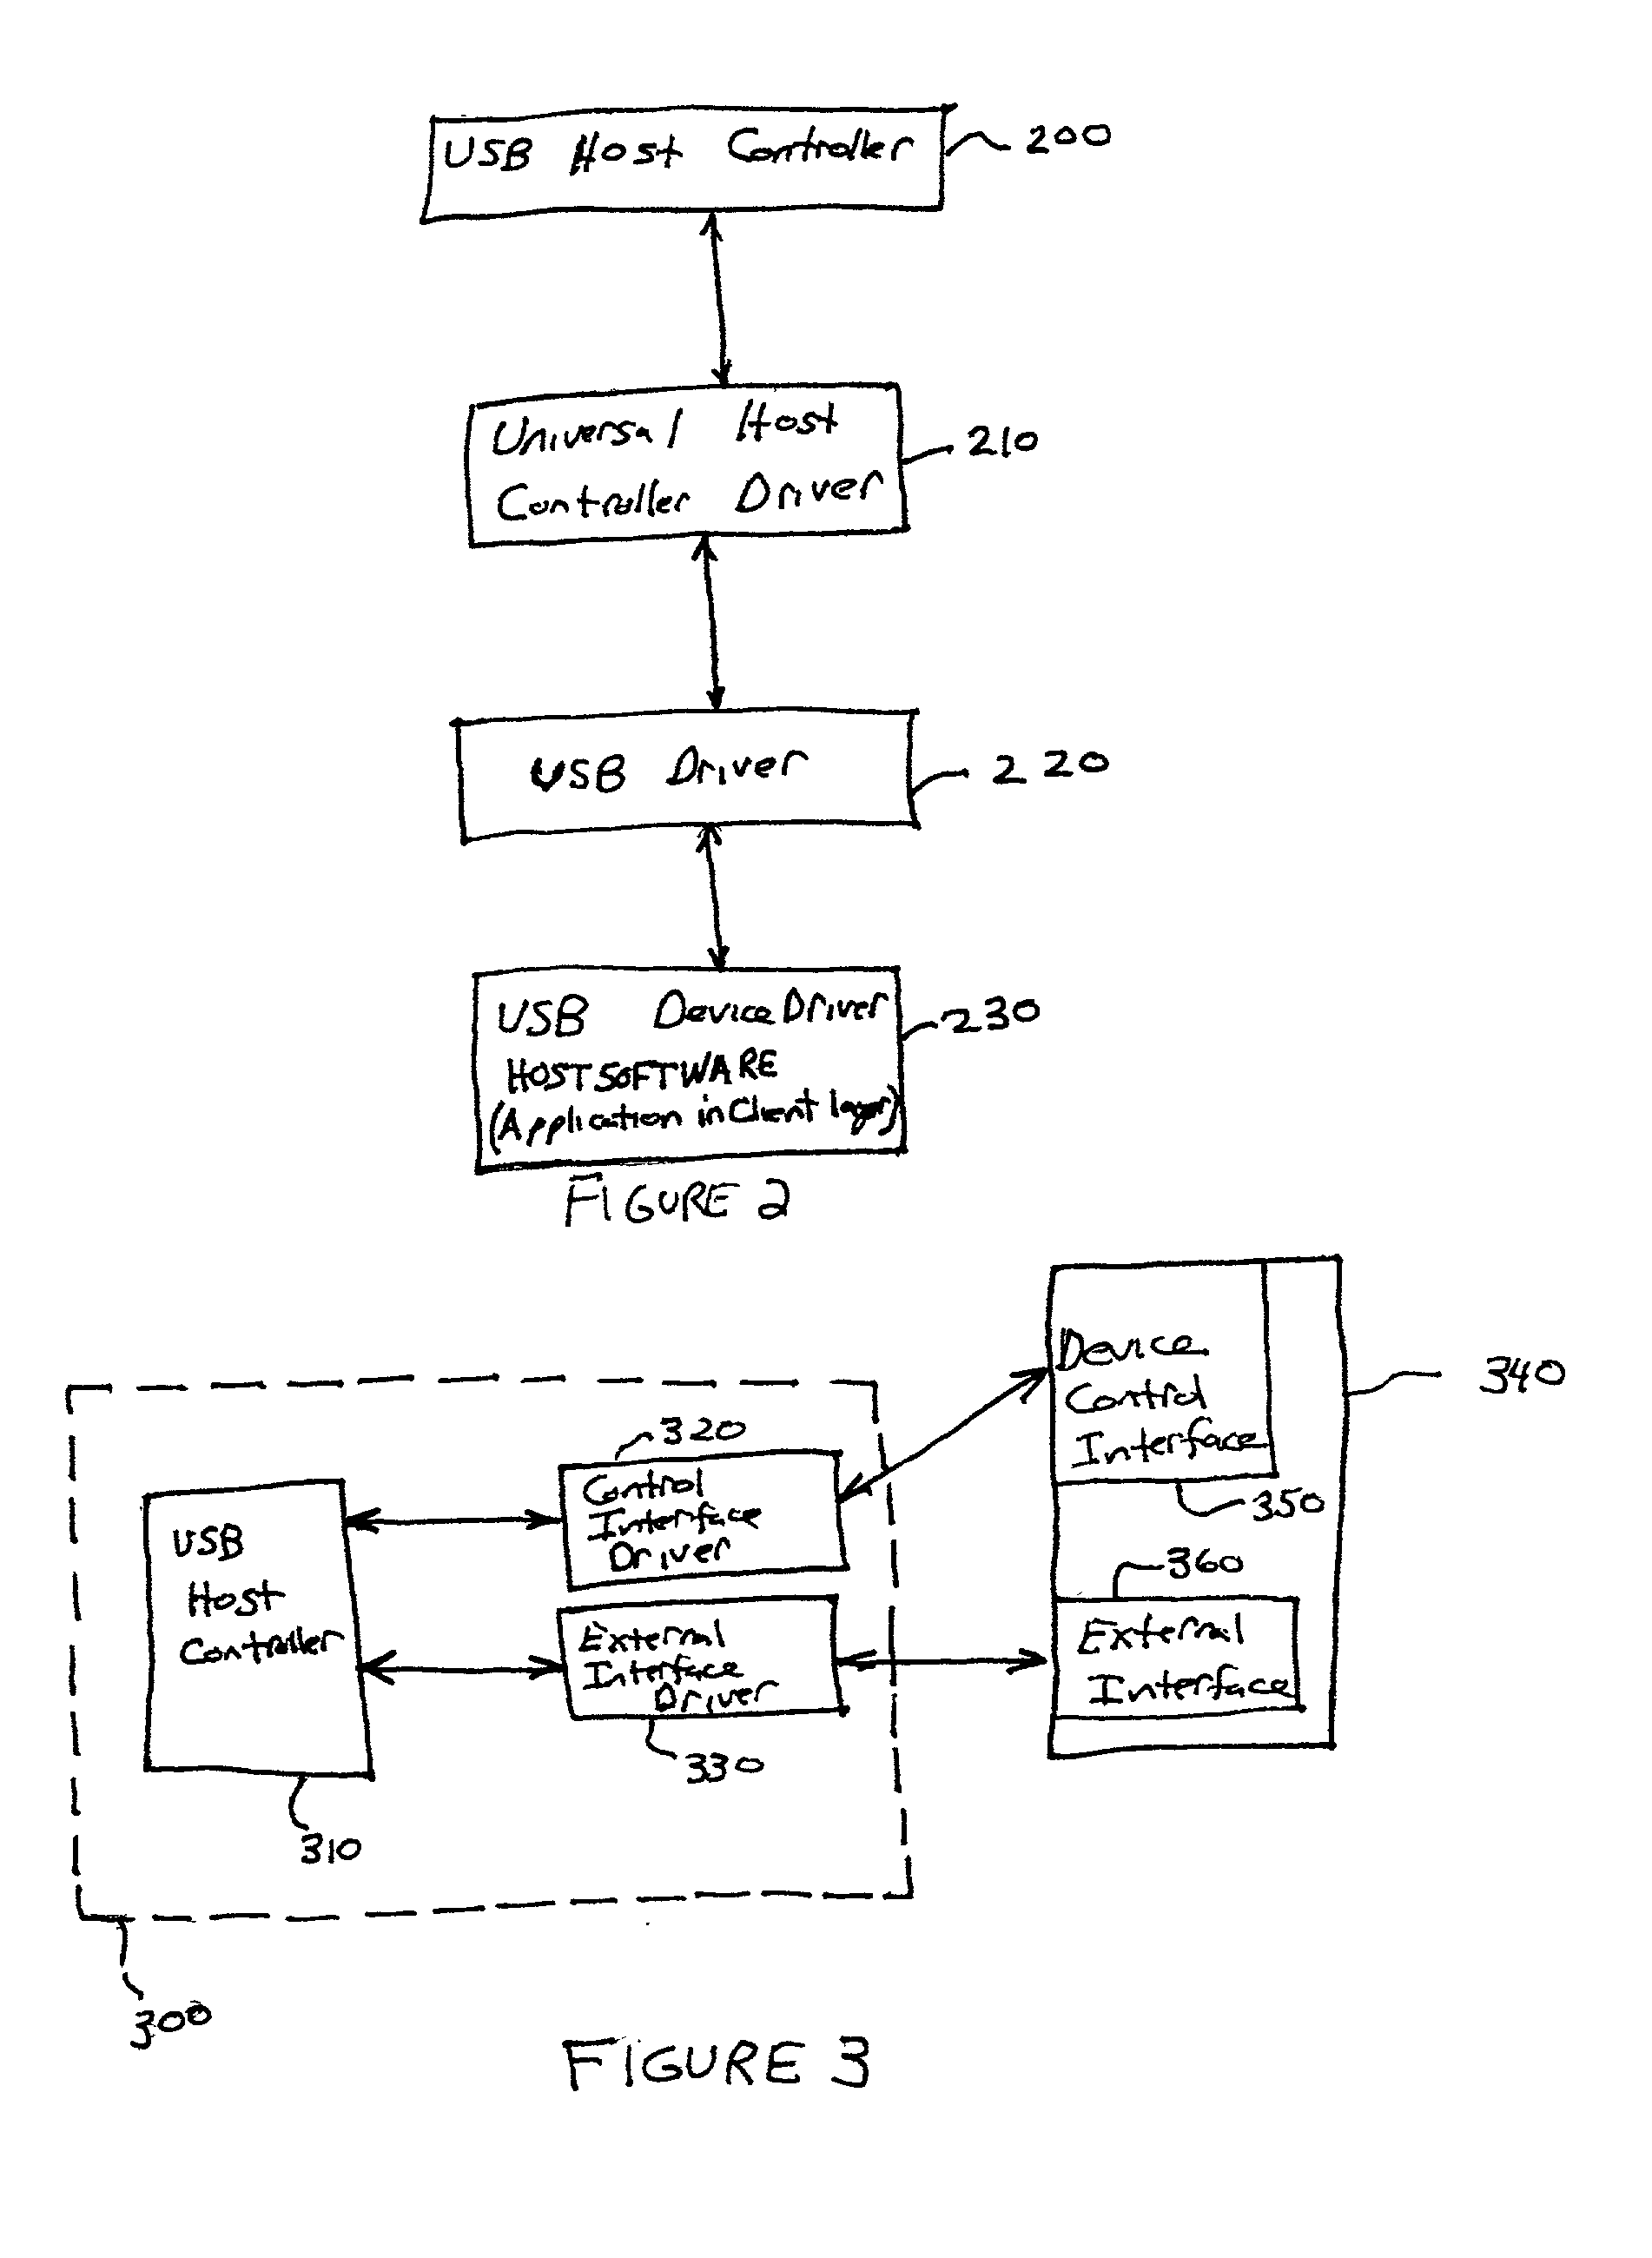 Universal serial bus telephony interface